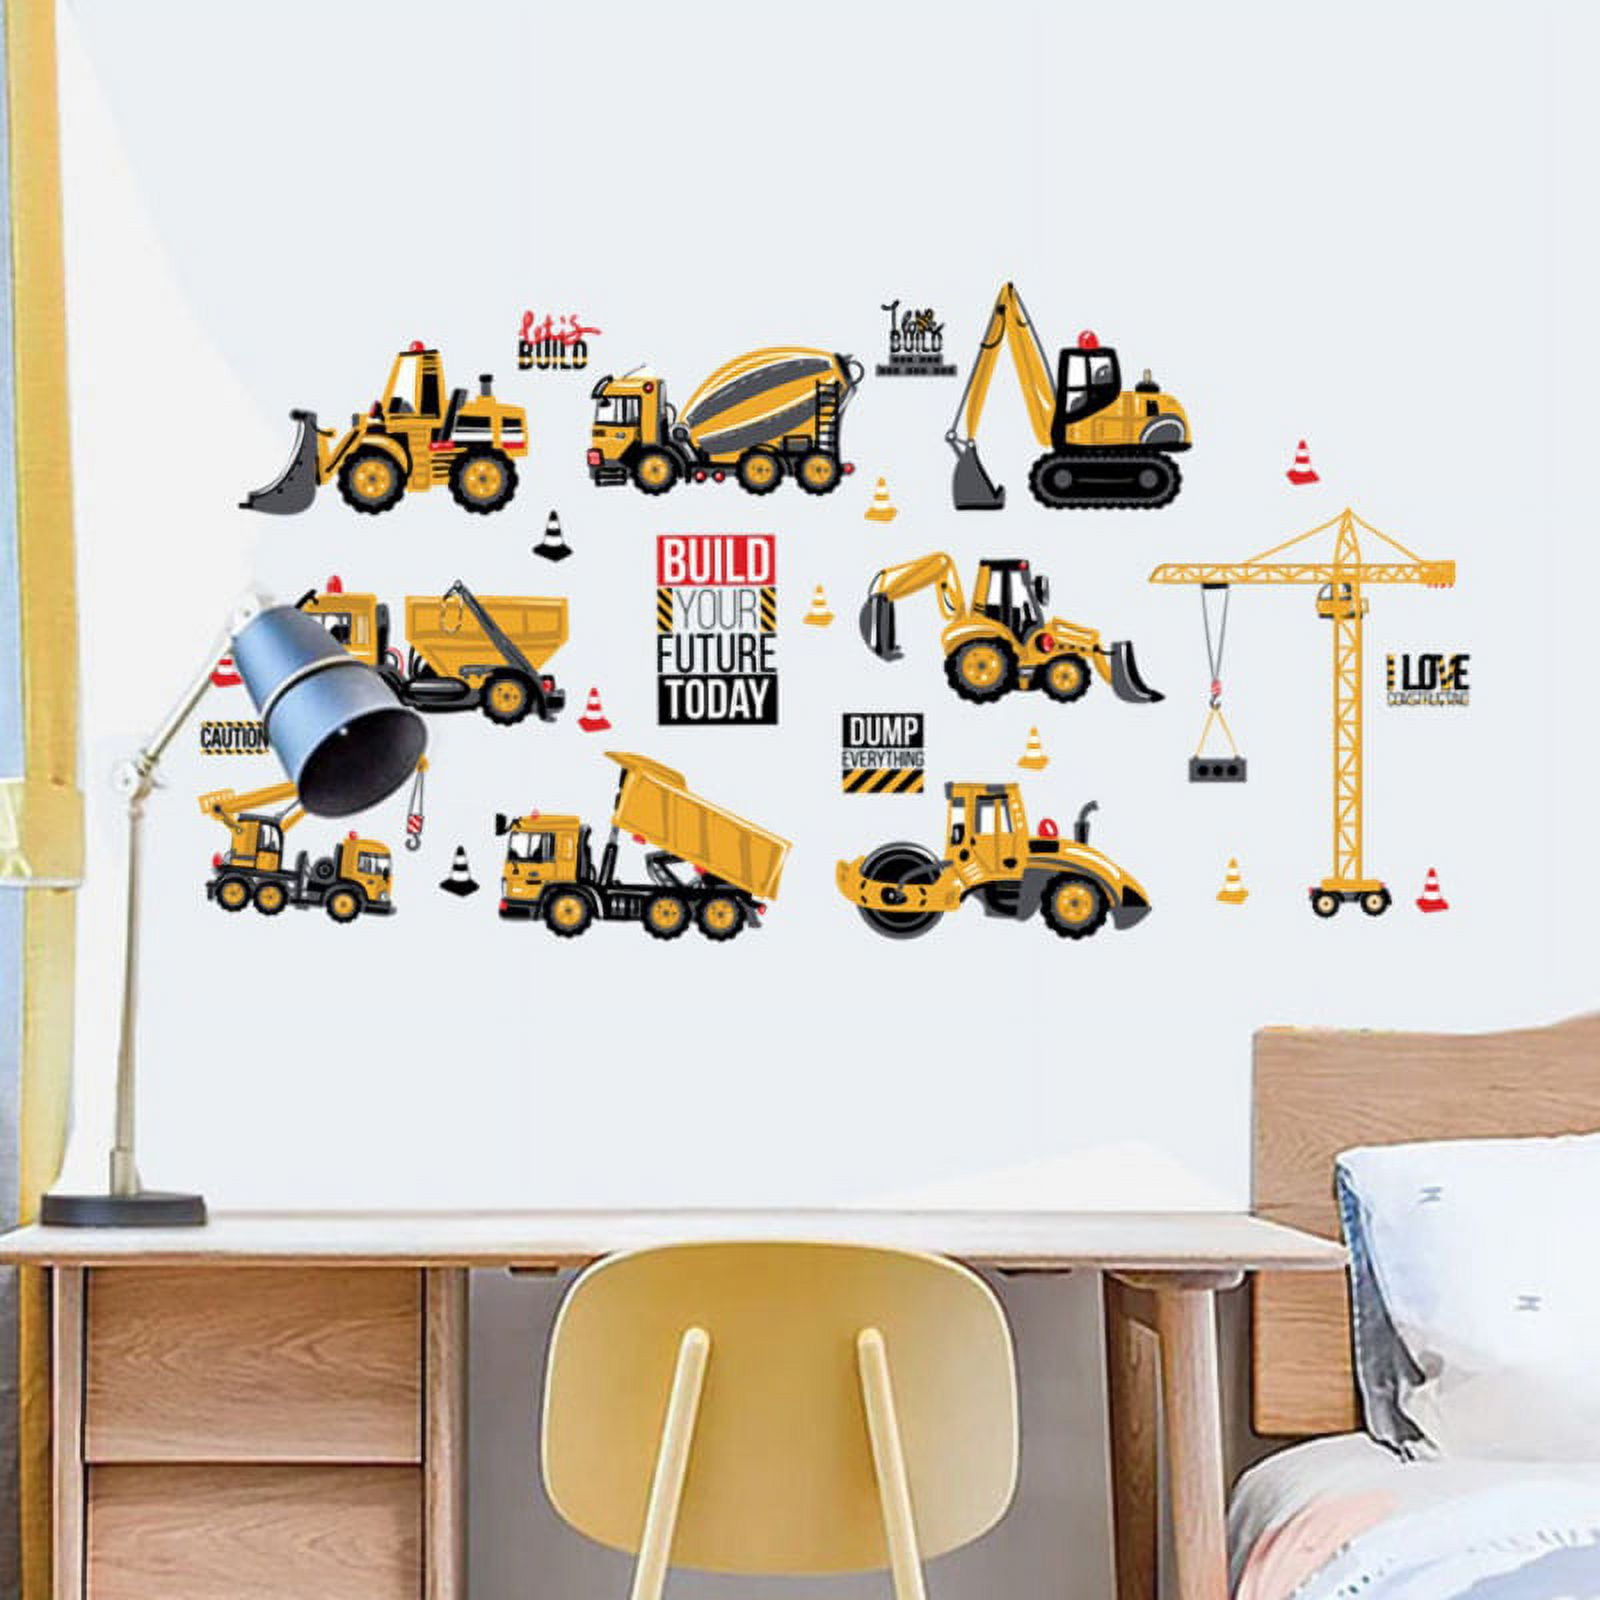 Kids Room Wall Ideas for Creative Child Development | Blog | Square Signs